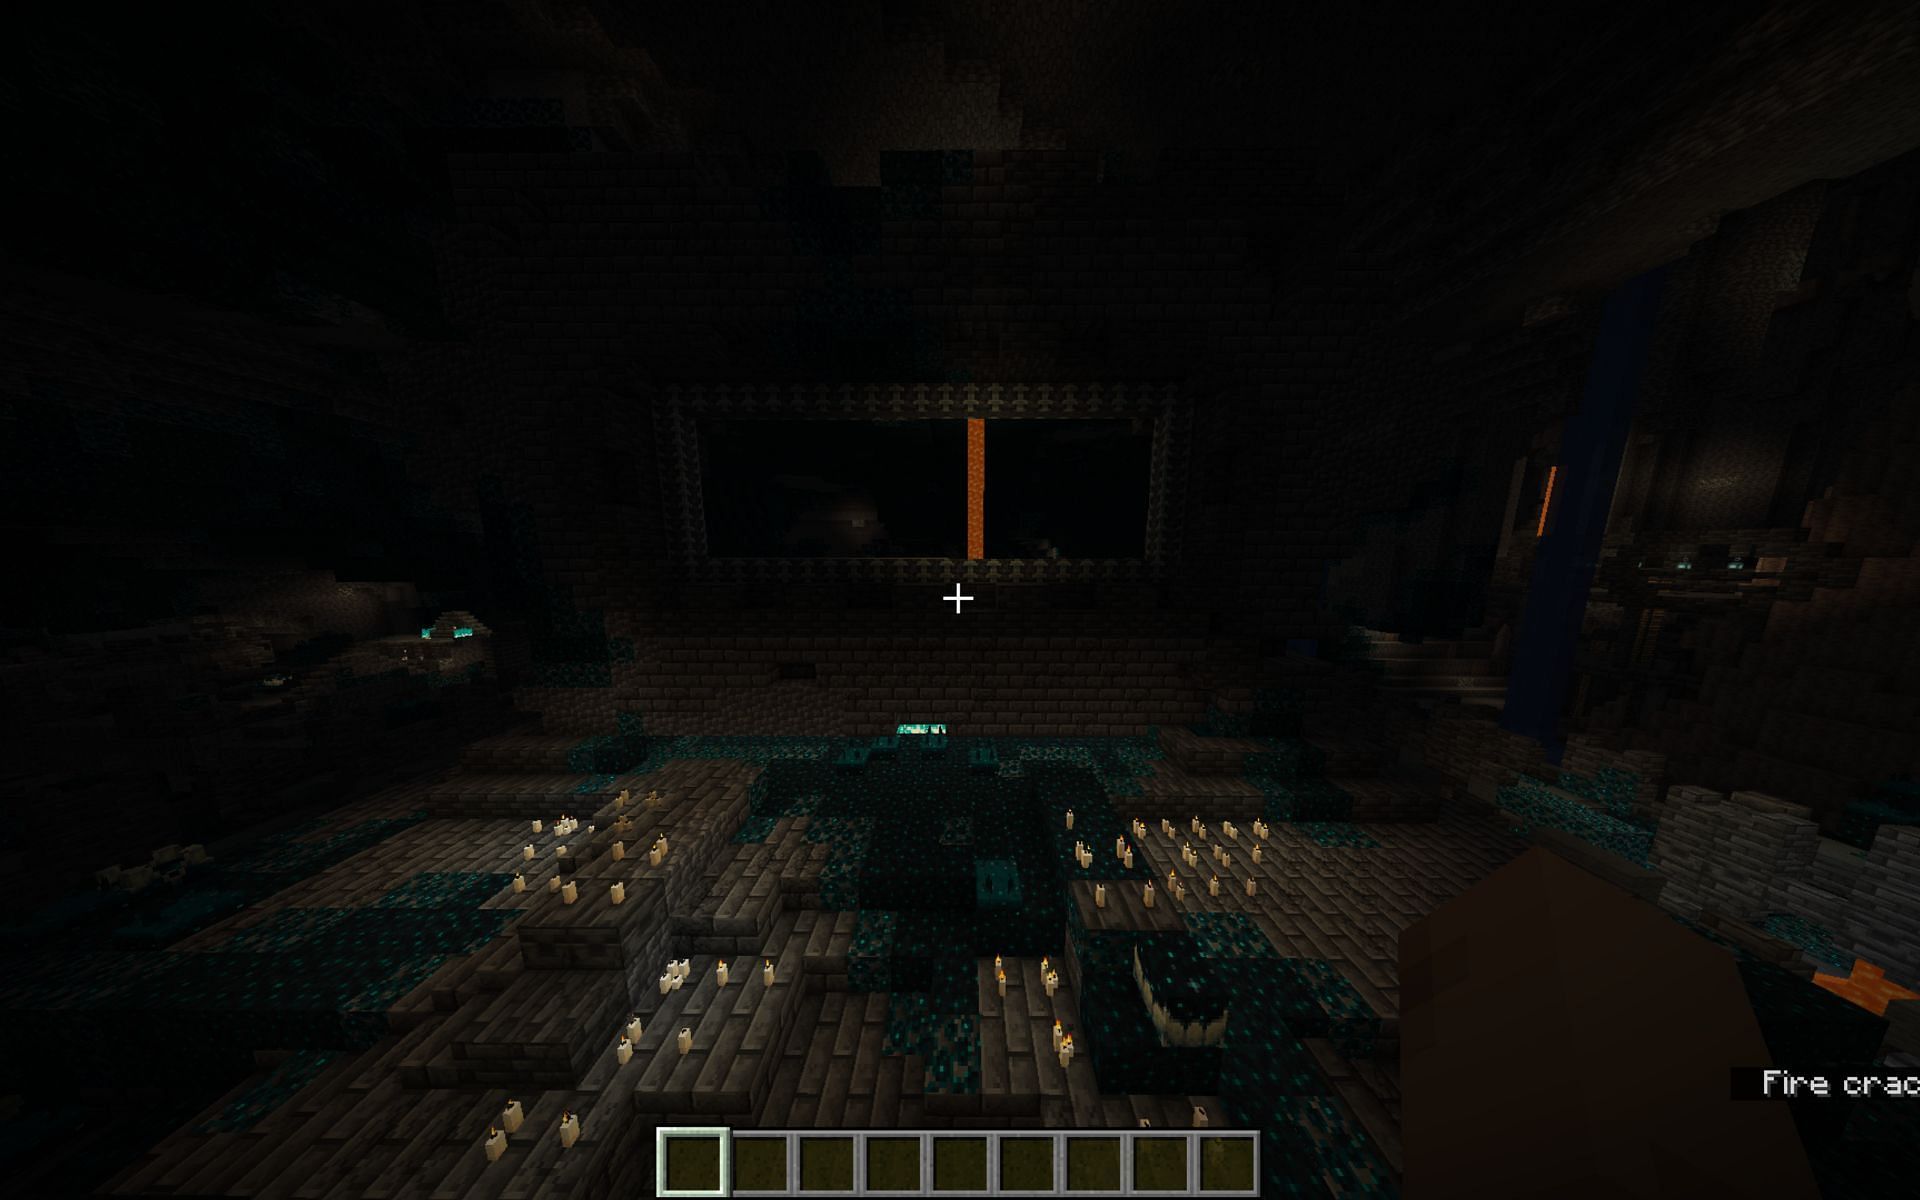 This Ancient City can be found next to spawn (Image via Mojang)